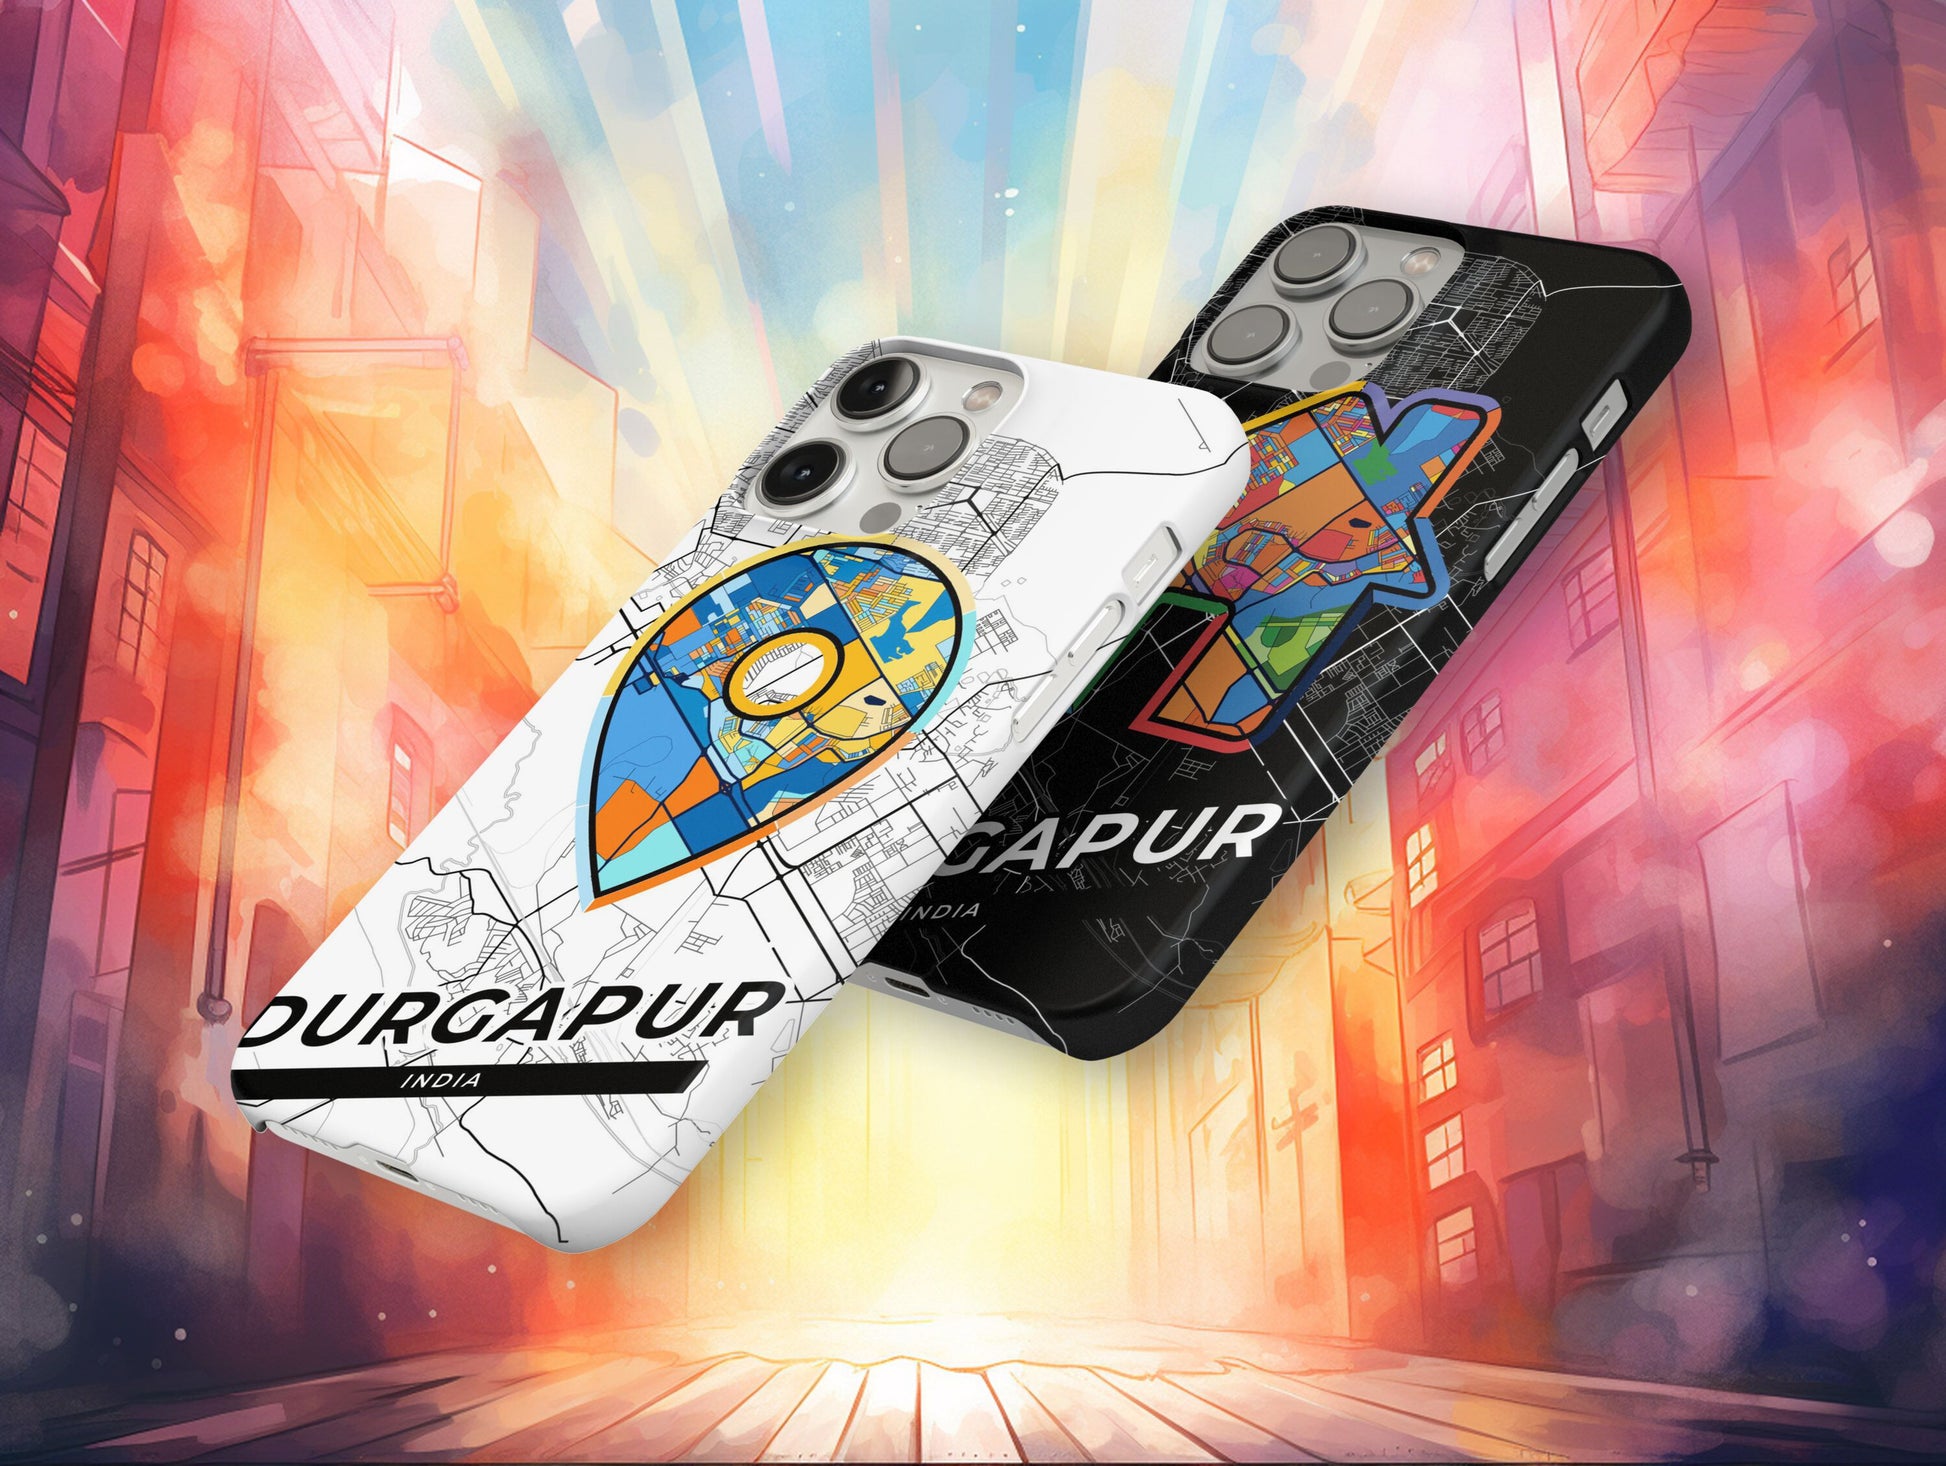 Durgapur India slim phone case with colorful icon. Birthday, wedding or housewarming gift. Couple match cases.